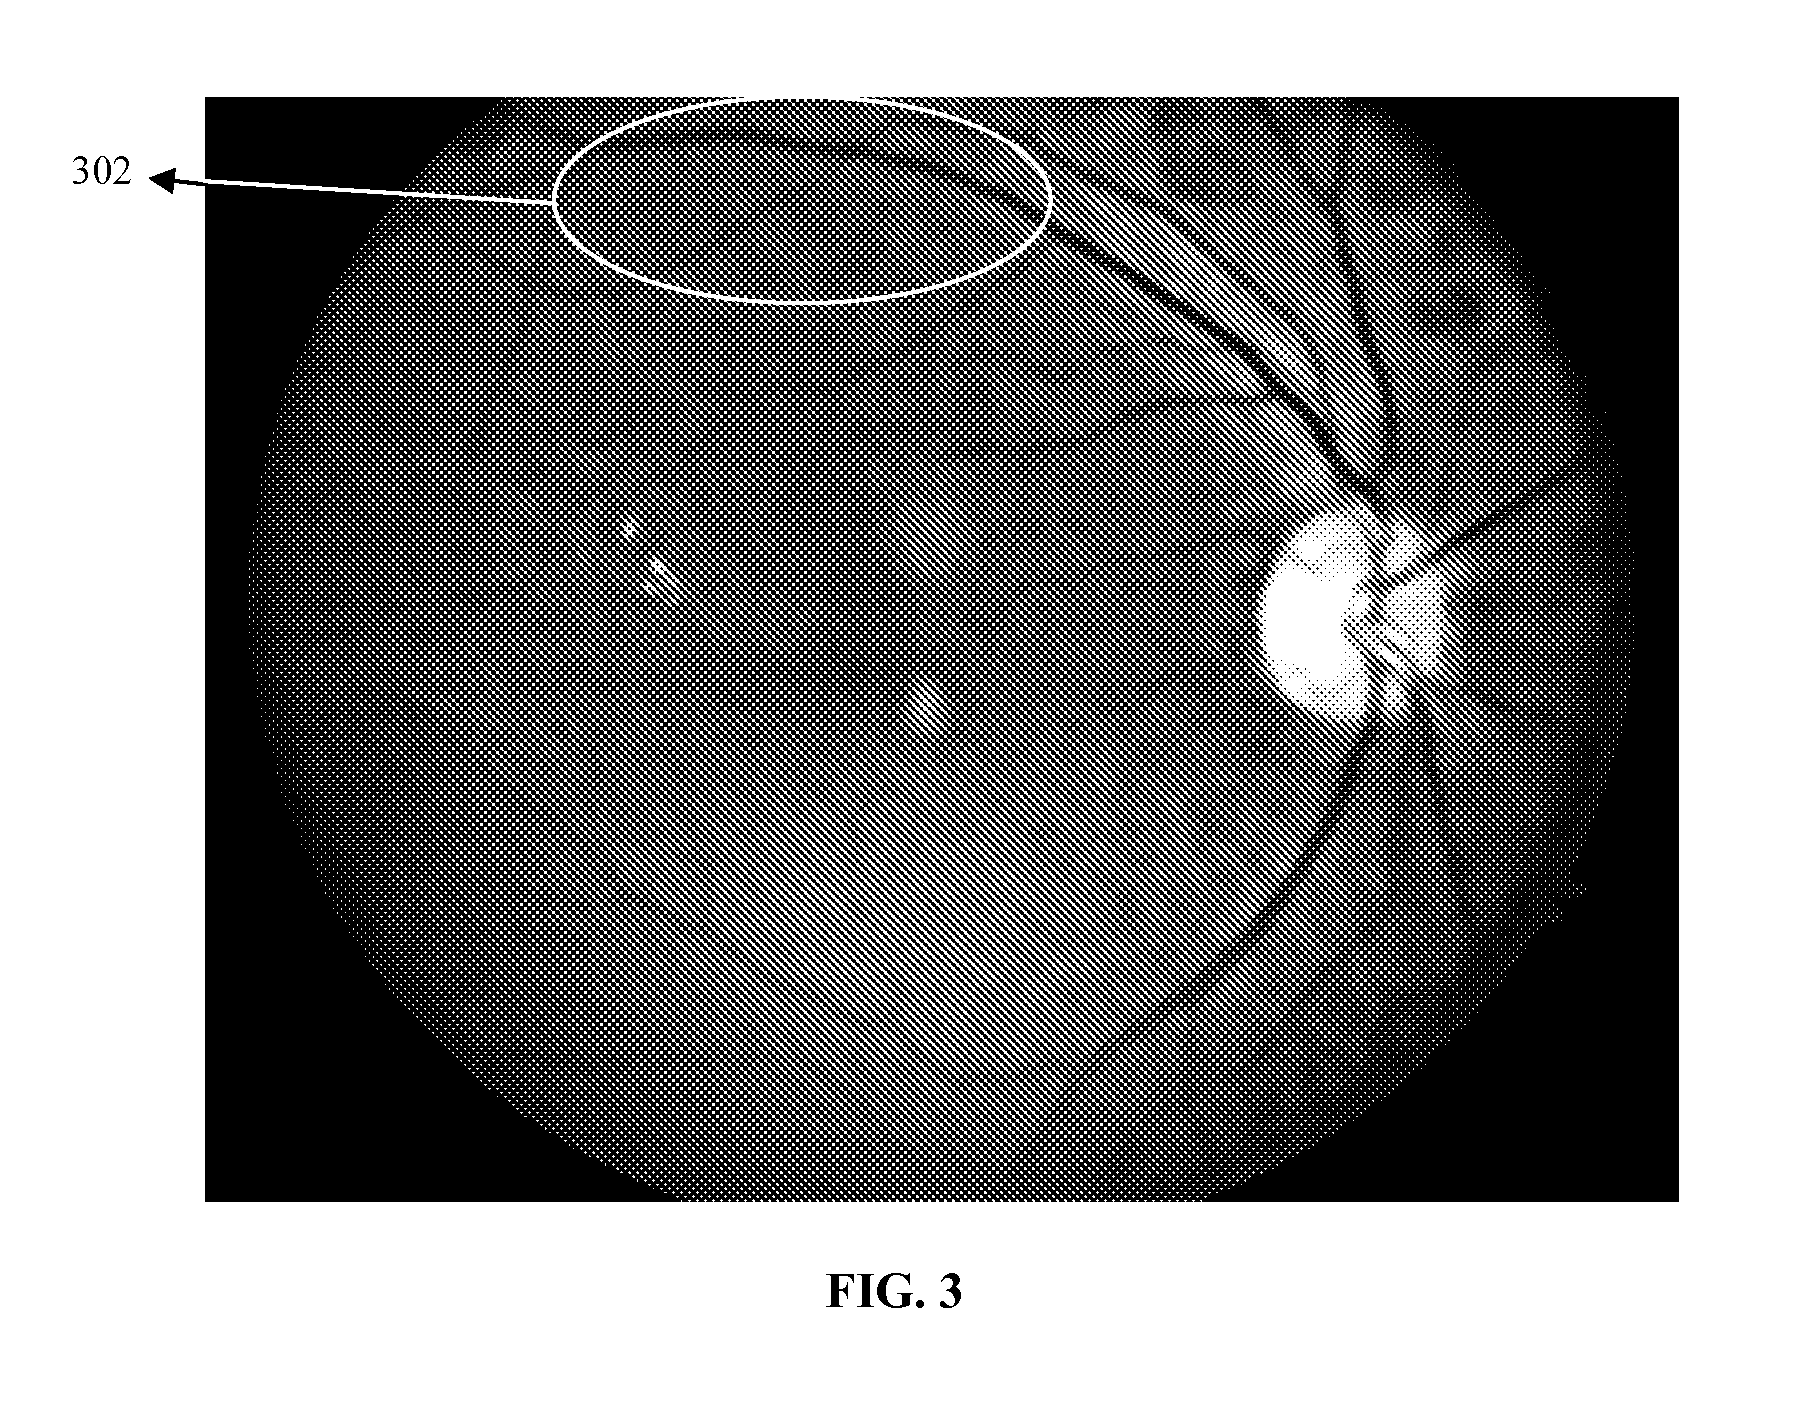 Method and system for enhancing image quality